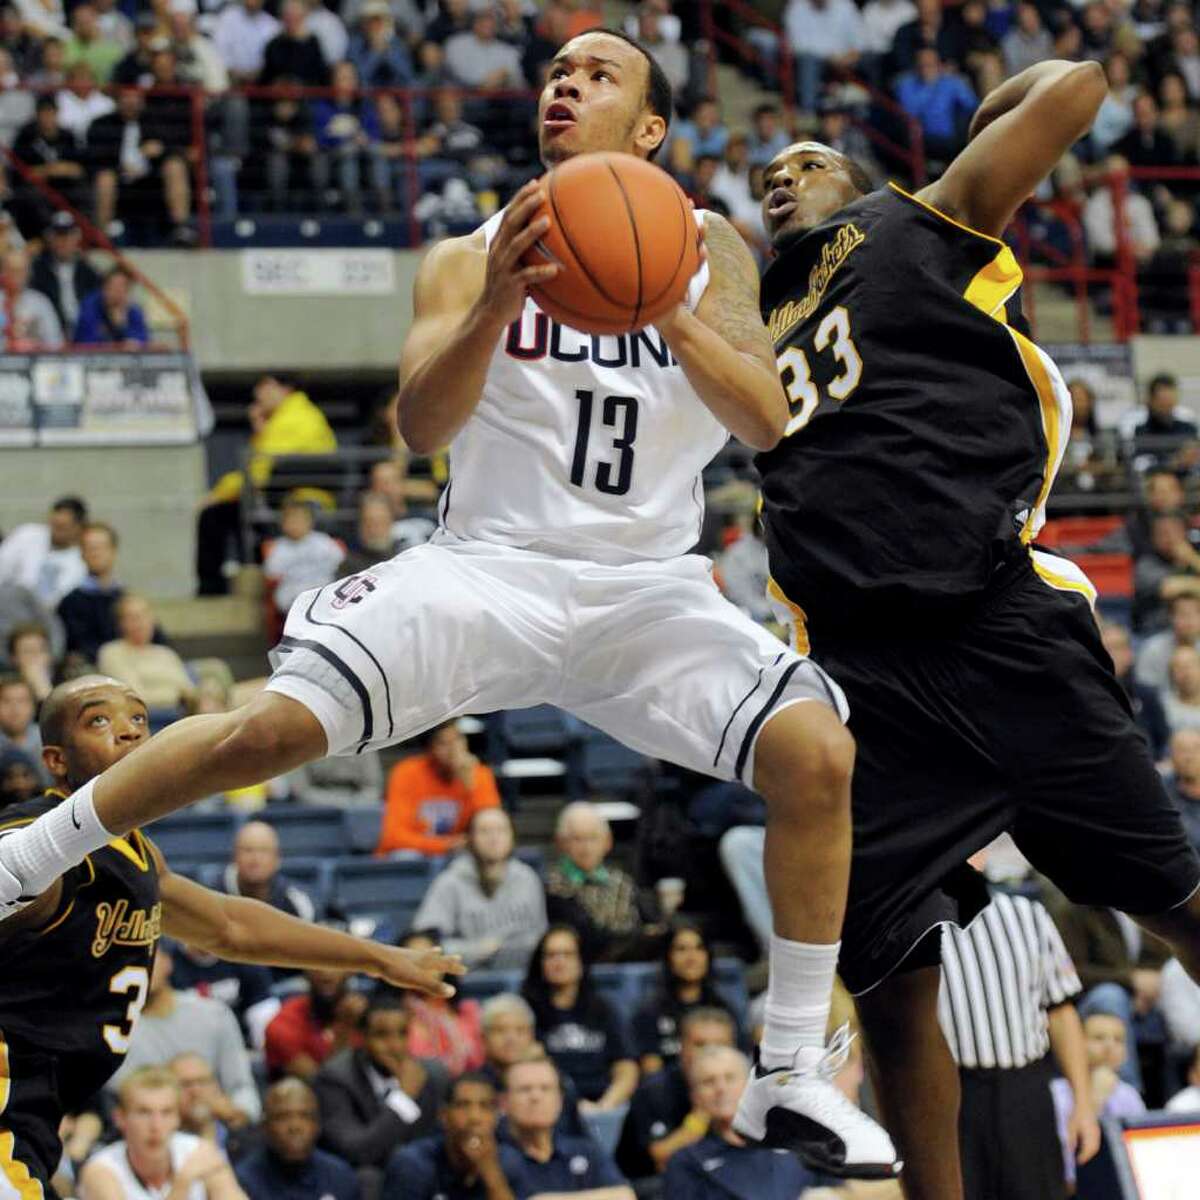 Connecticut's Shabazz Napier rises up past American International's Braxton Gardner for a shot in the second half of an NCAA college basketball exhibition game Wednesday, Nov. 2, 2011, in Storrs, Conn. Connecticut defeated American International 78-35. (AP Photo/Bob Child)